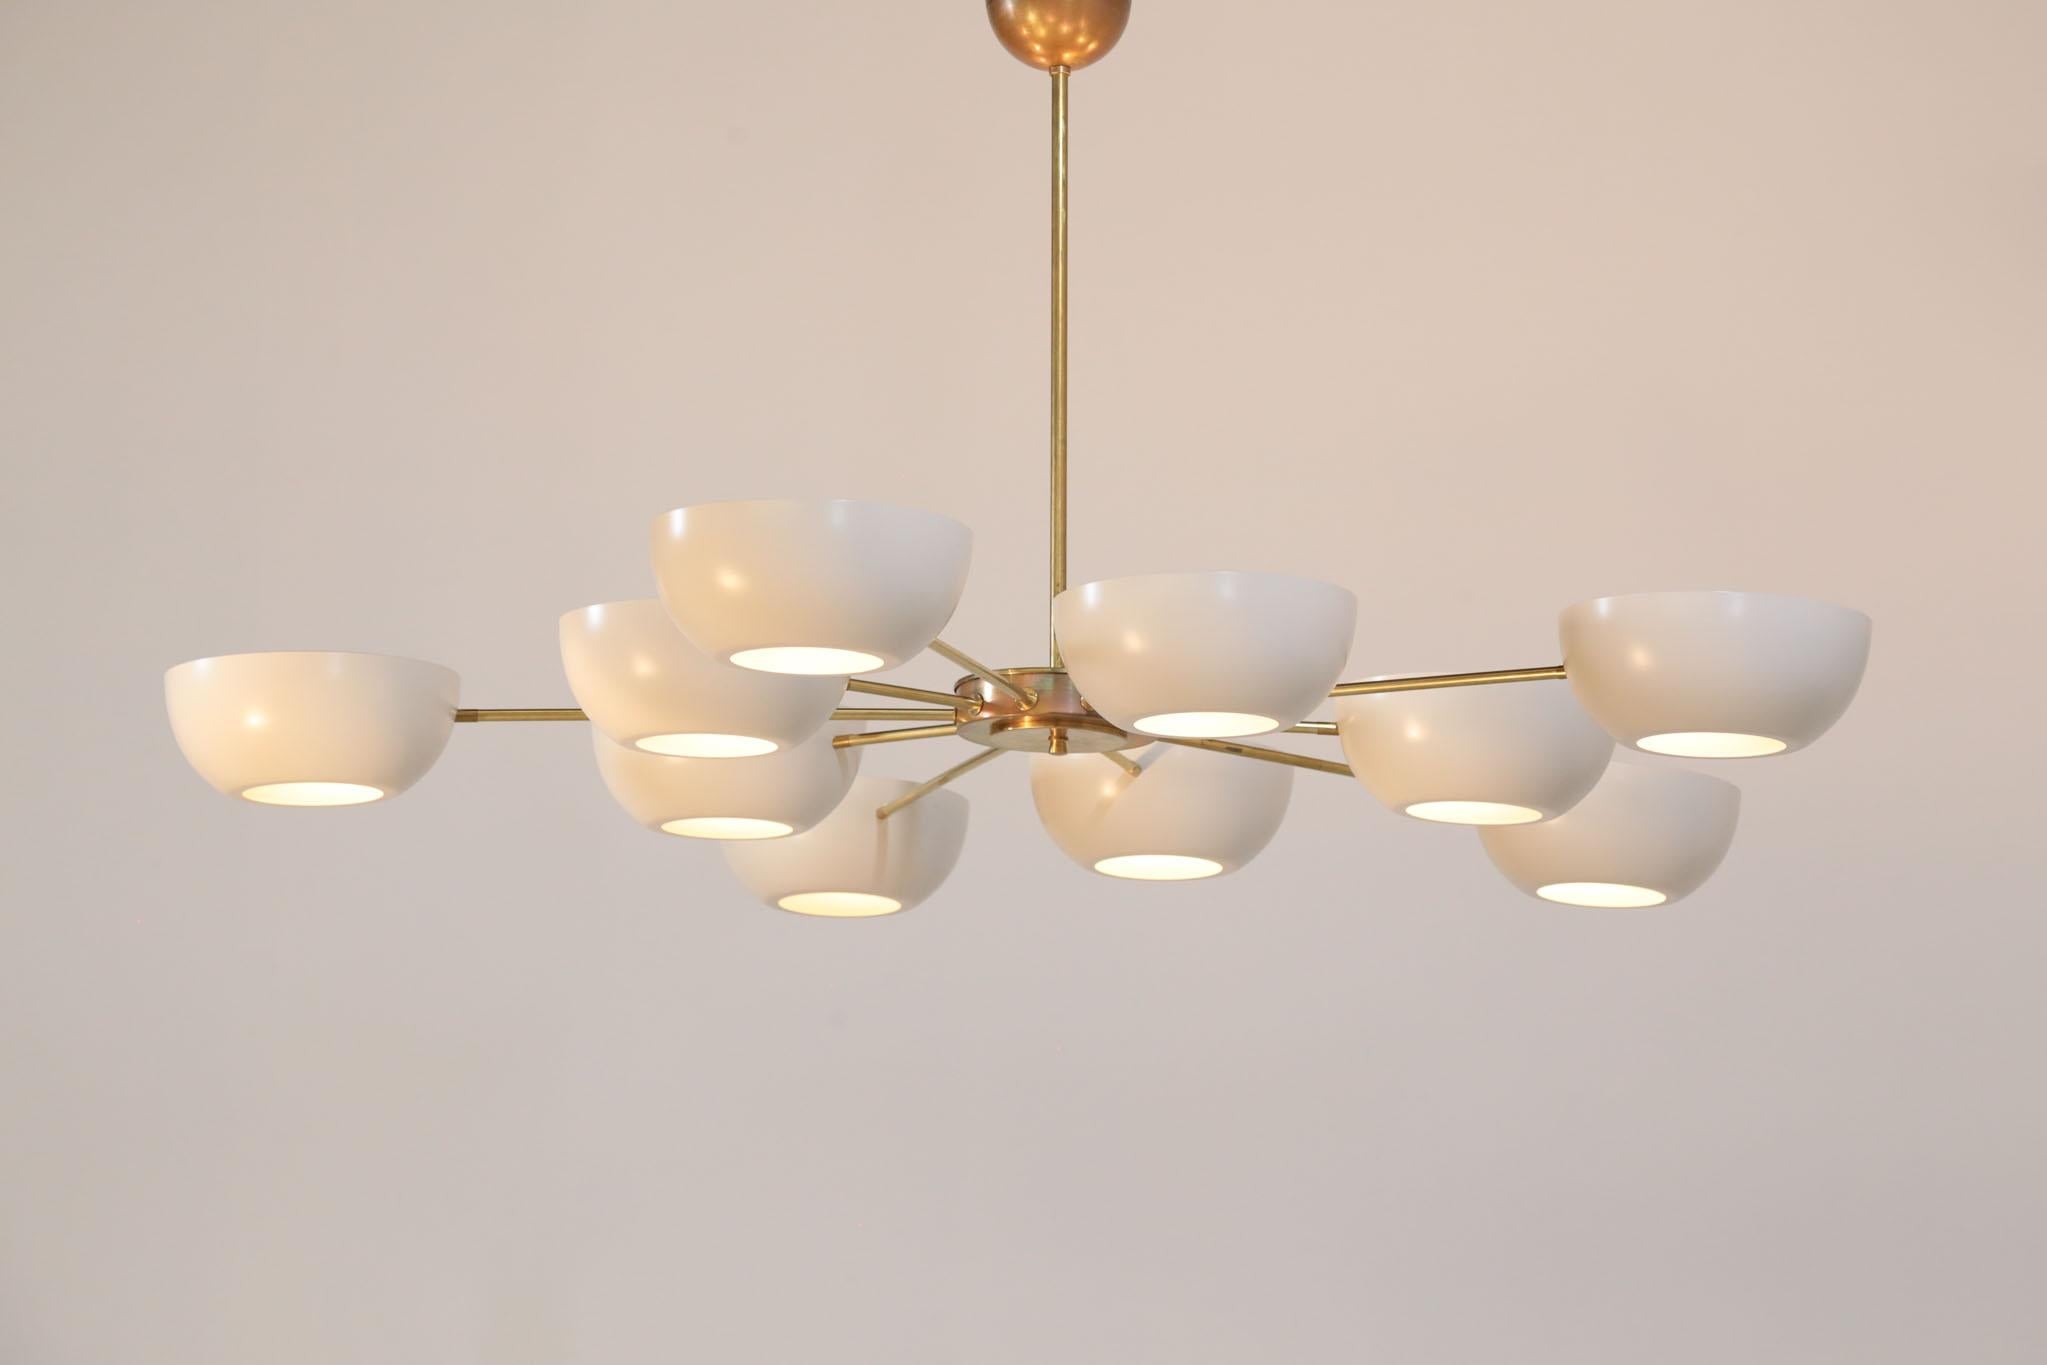 Large Italian Modern Chandelier with 12 Arms in Gino Sarfatti Style 2